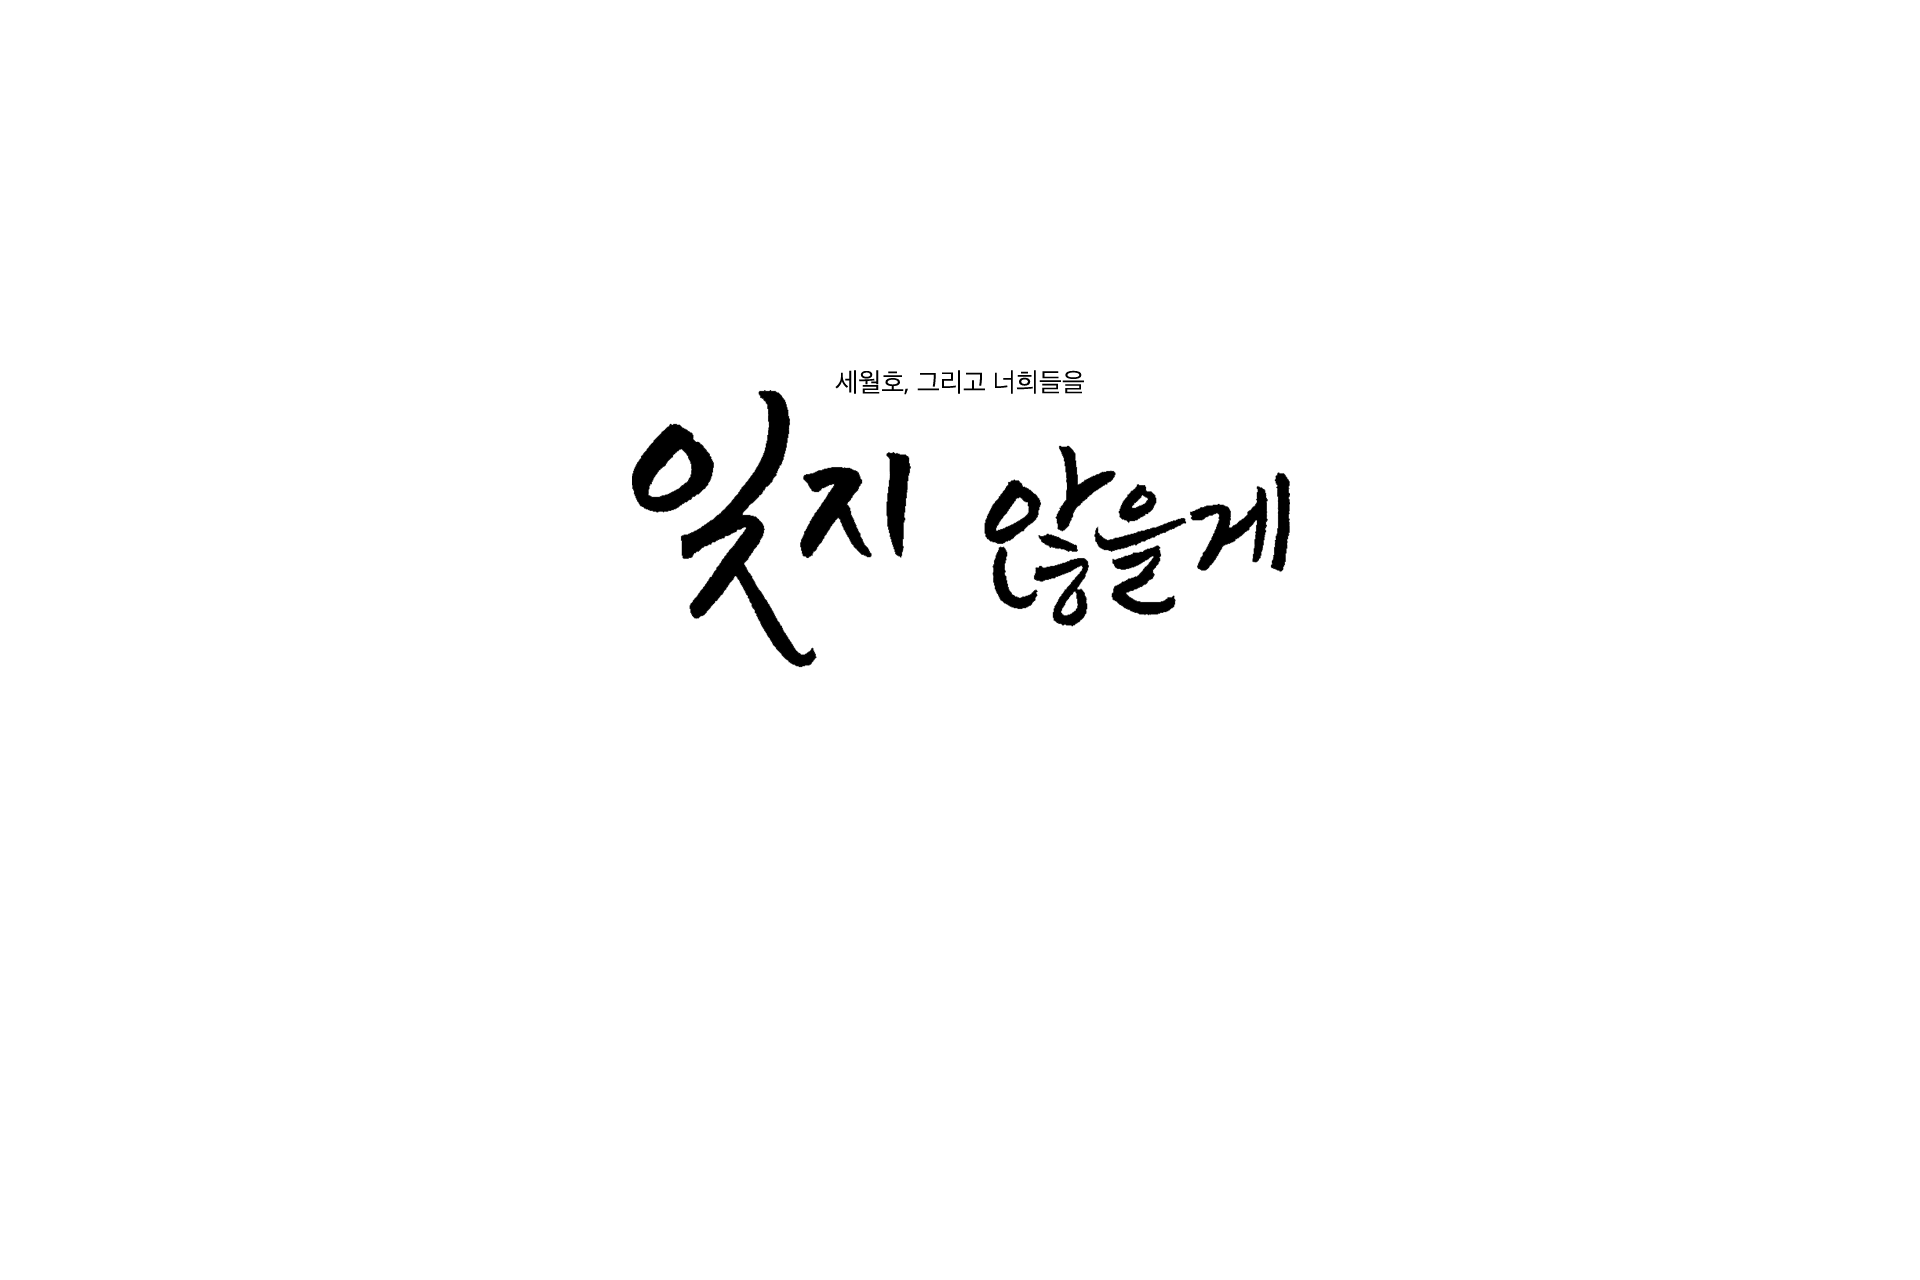 http://interactive.vop.co.kr/2014/sewol/media/intro.gif